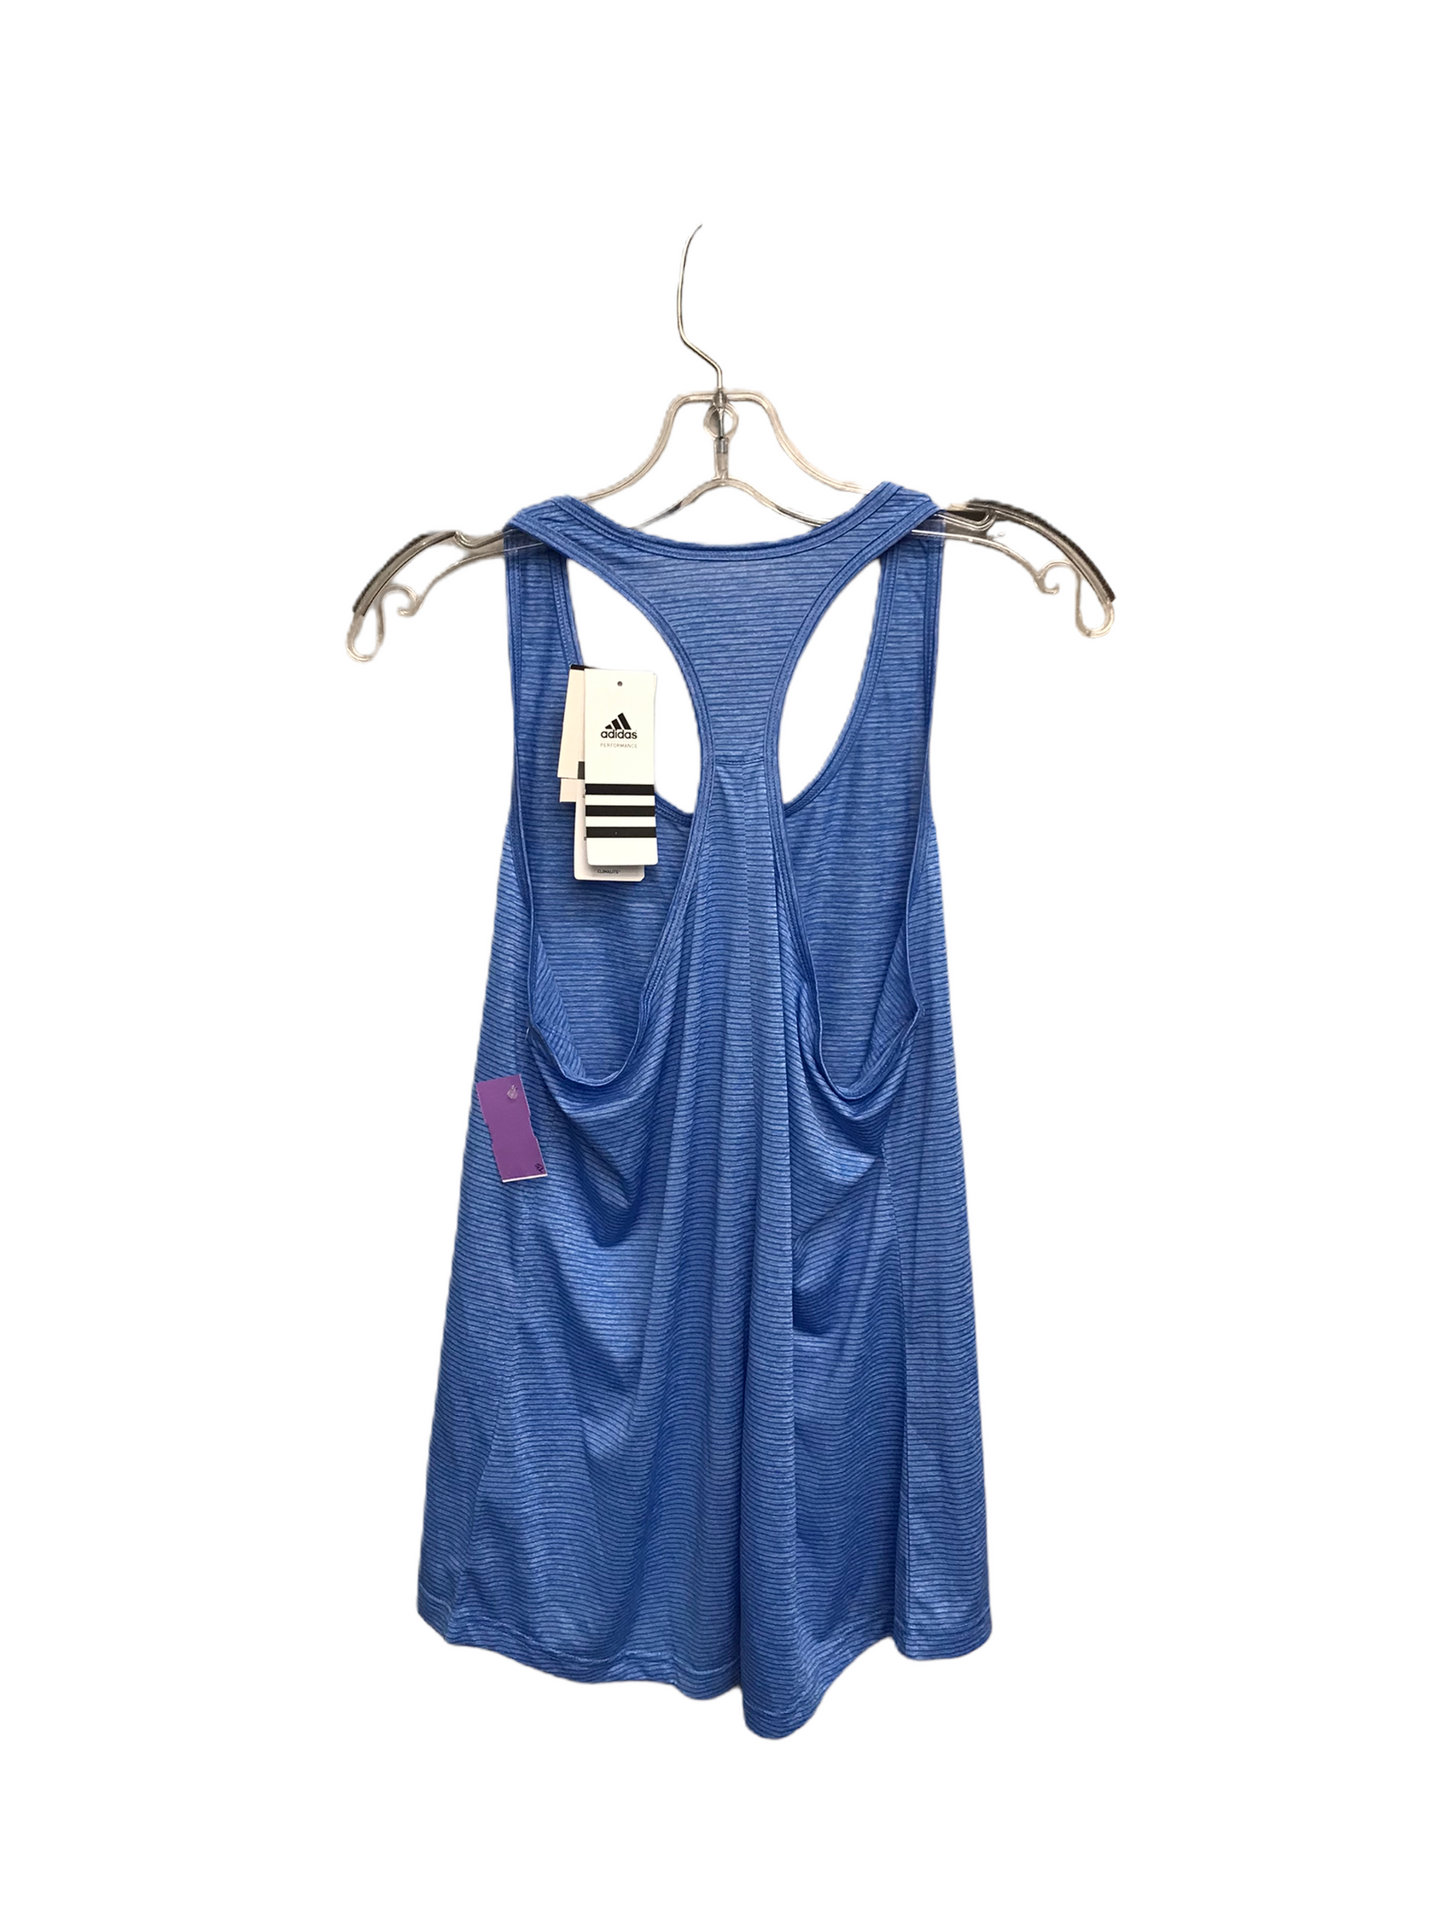 Blue Athletic Tank Top By Adidas, Size: M